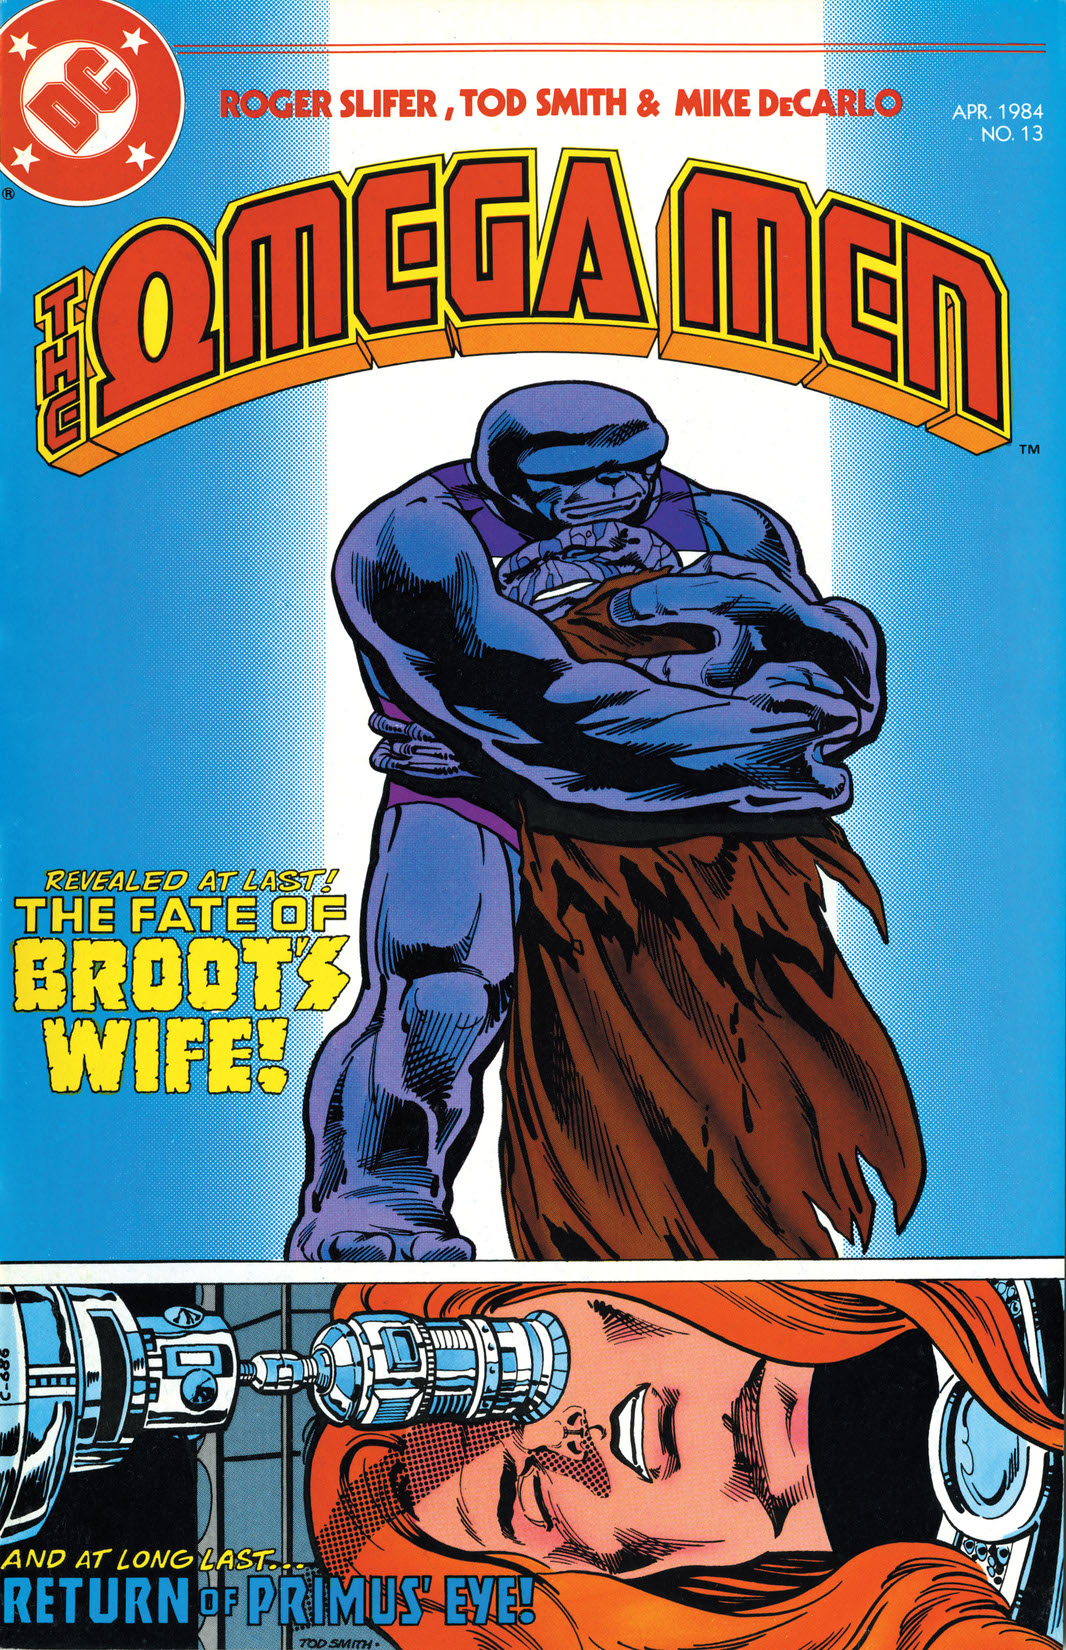 The Omega Men (1983-) #13 preview images